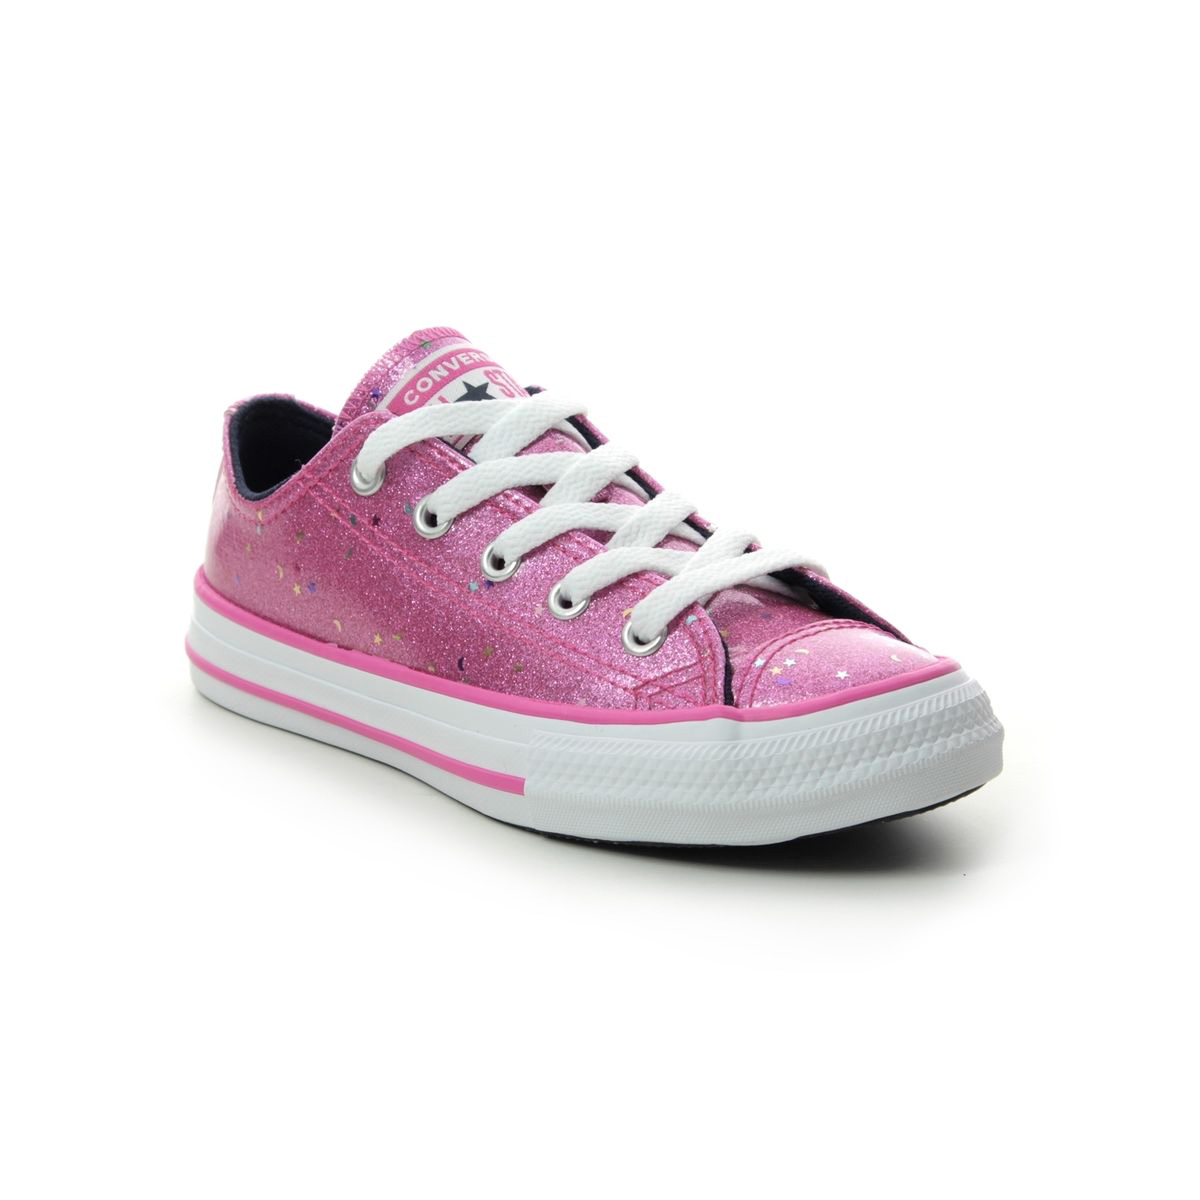 converse pink glitter sneakers